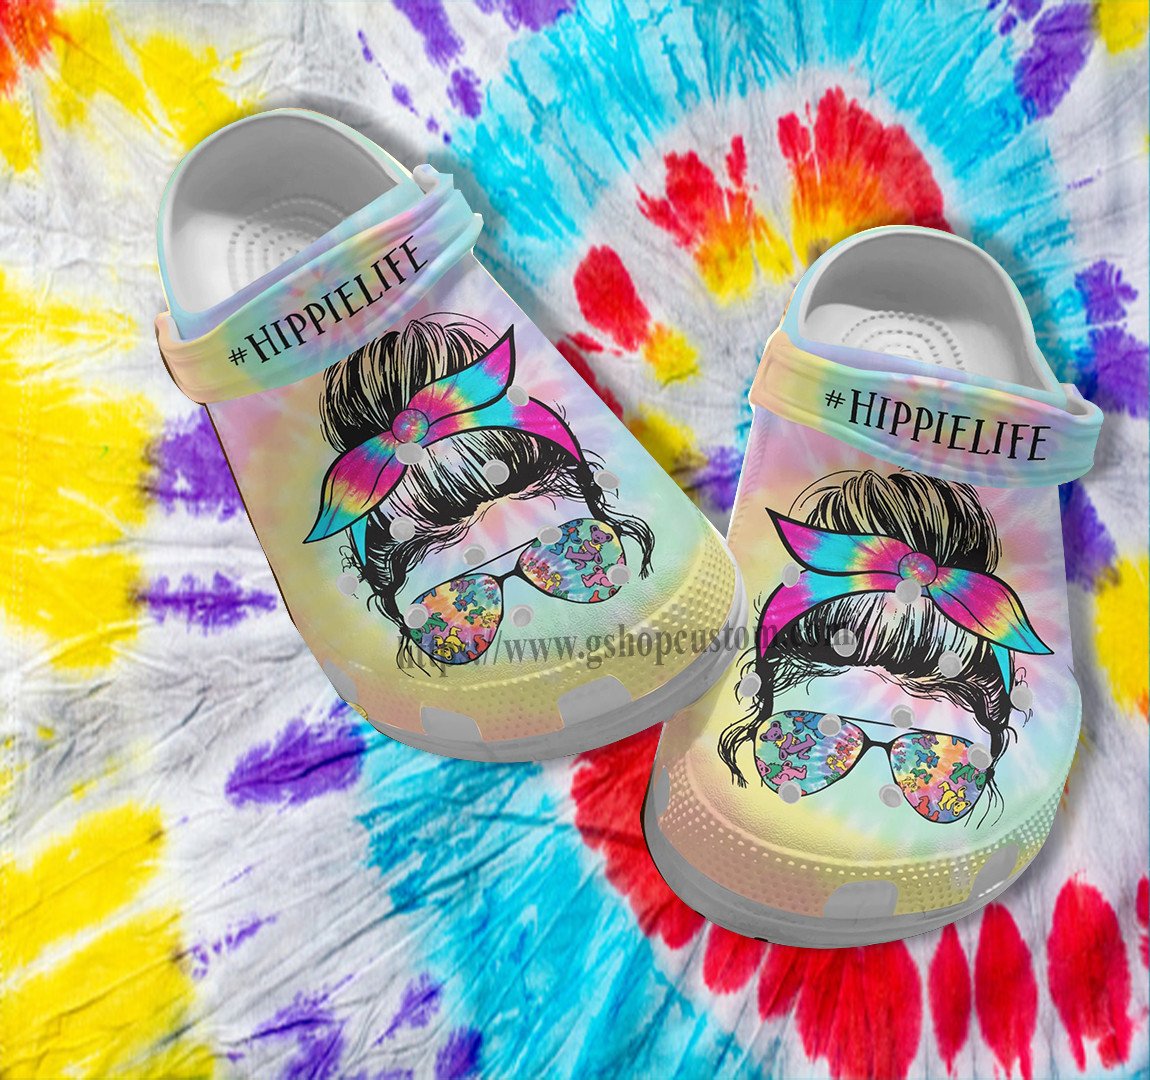 Hippie Life Girl Glasses Croc Shoes Gift Mommy- Hippie Rainbow Shoes Croc Clogs Customize Mother Day Gift- Cr-Ne0468